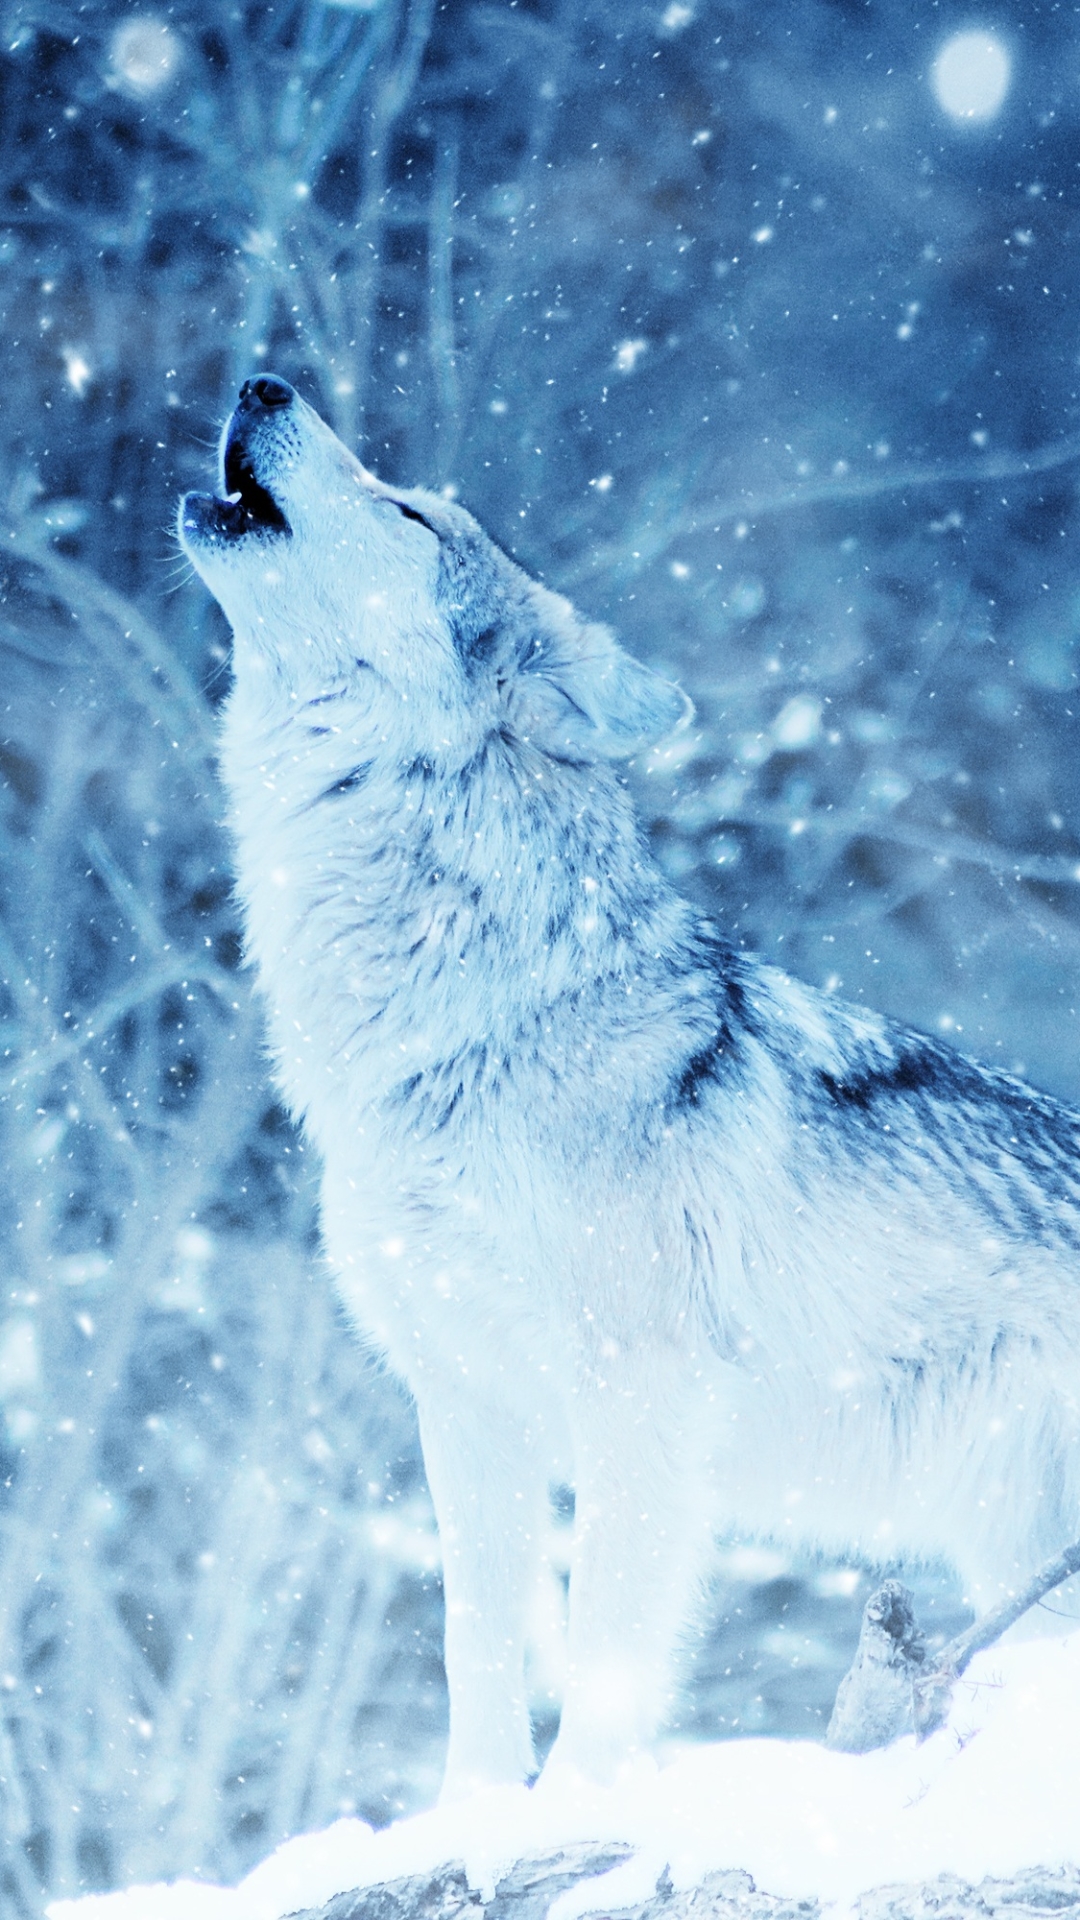 wolf, snowfall, animal, howling, winter, wolves